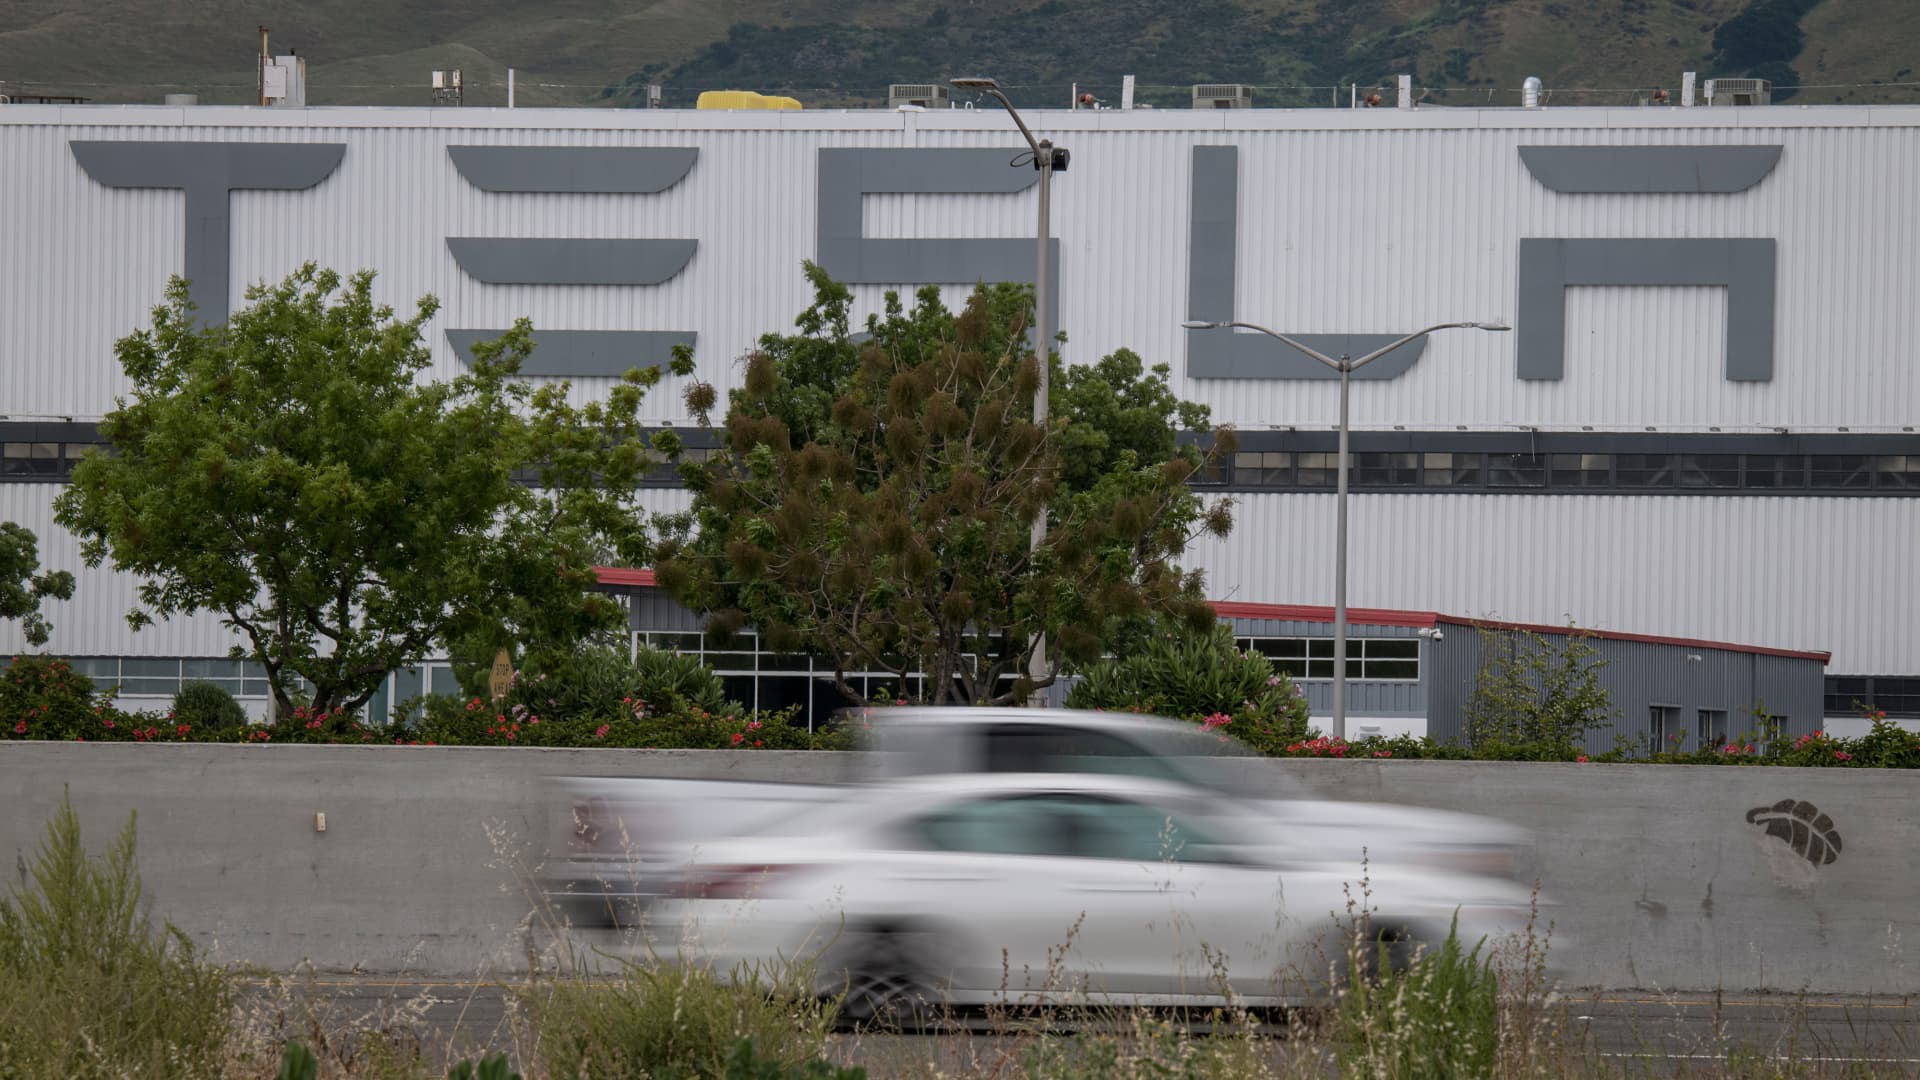 EEOC sues Tesla alleging widespread racist harassment of Black workers, retaliation against those who spoke out